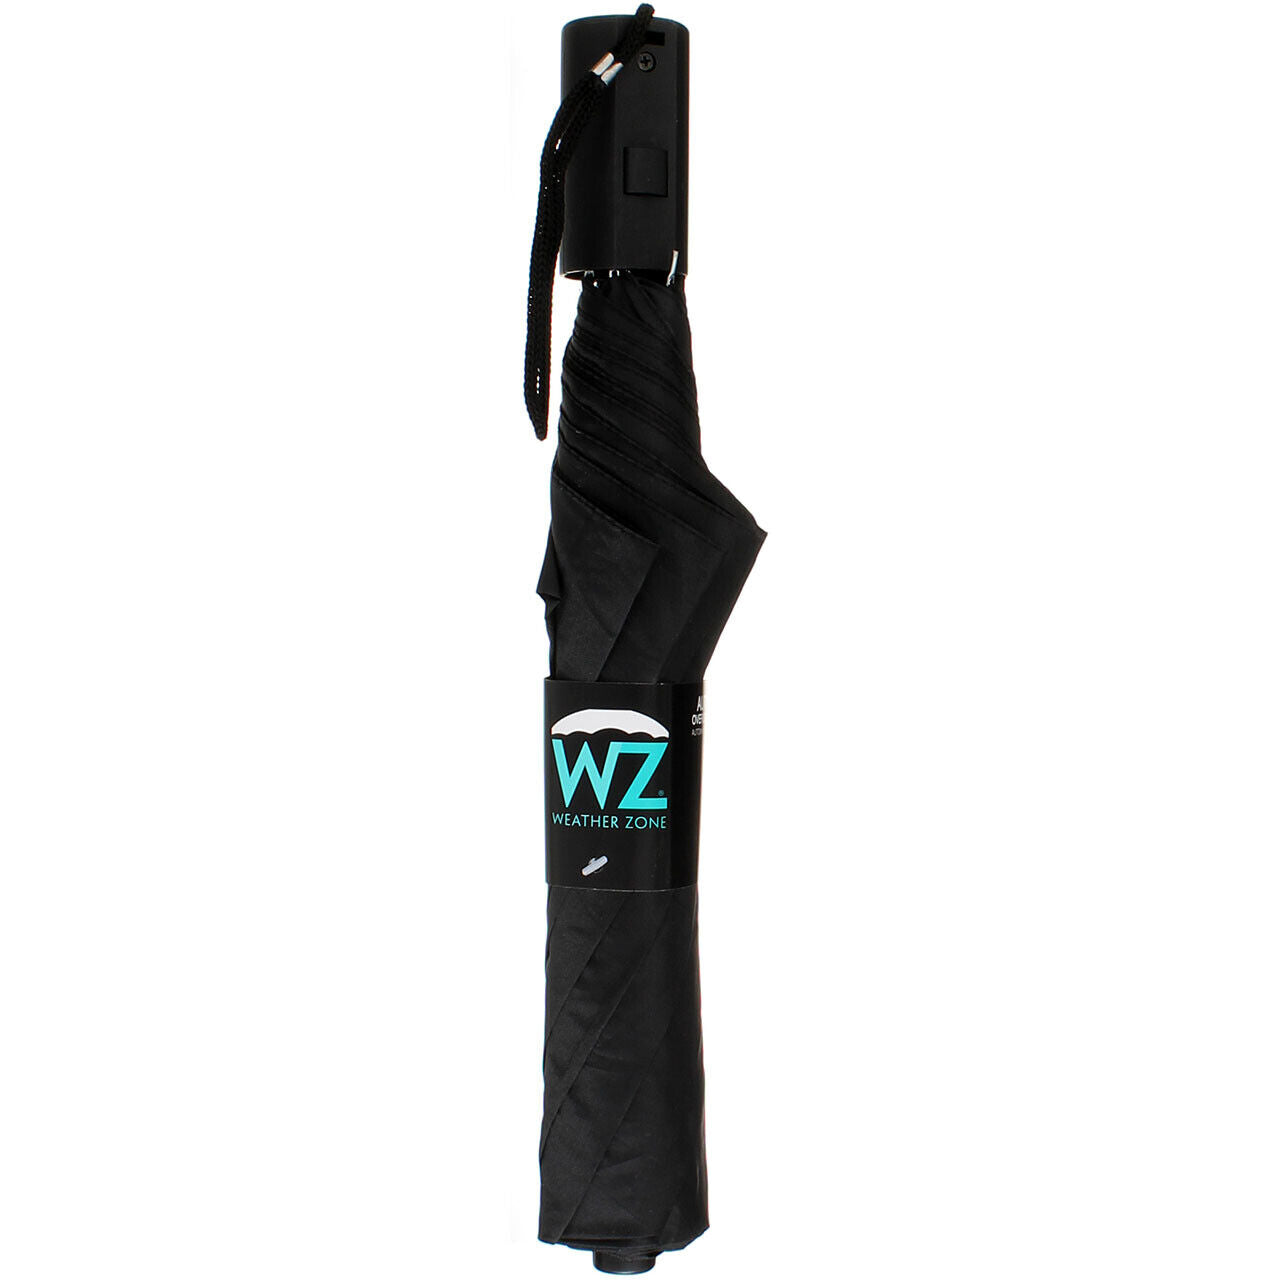 2 Pack Weather-Zone Umbrella, 38 inch, Automatic Open, Black 650